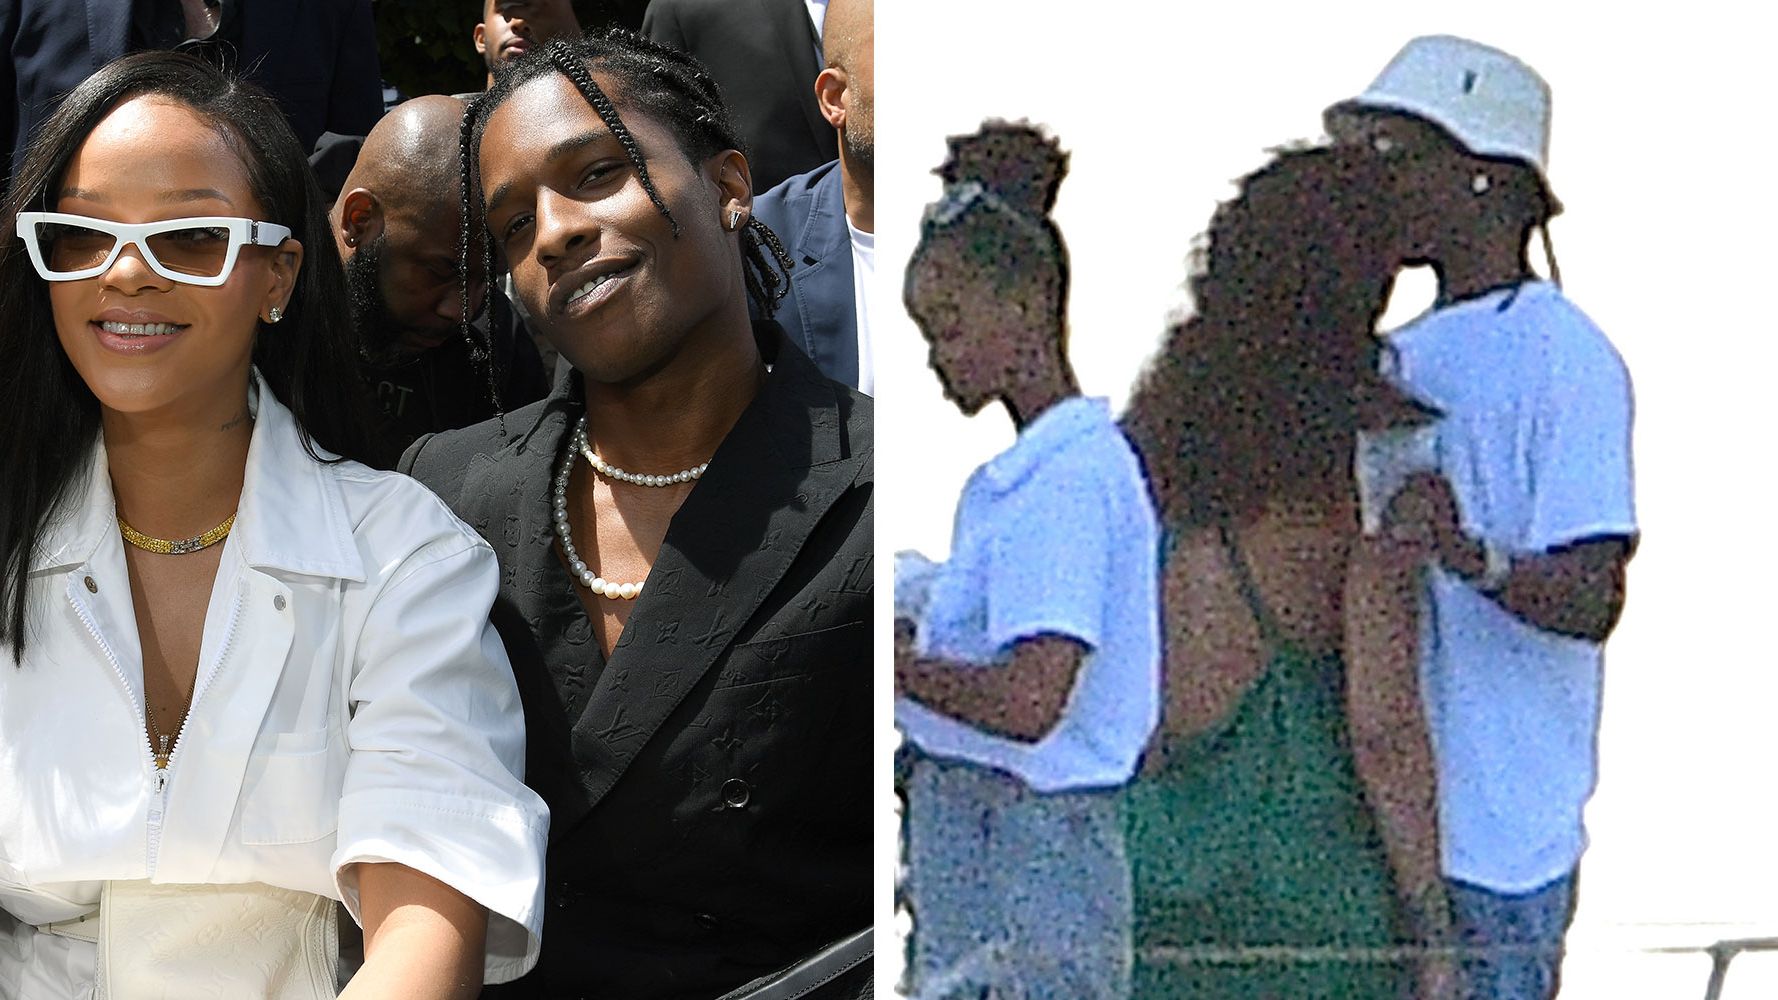 Rihanna and A$AP Rocky Both Share a Connection to Barbados